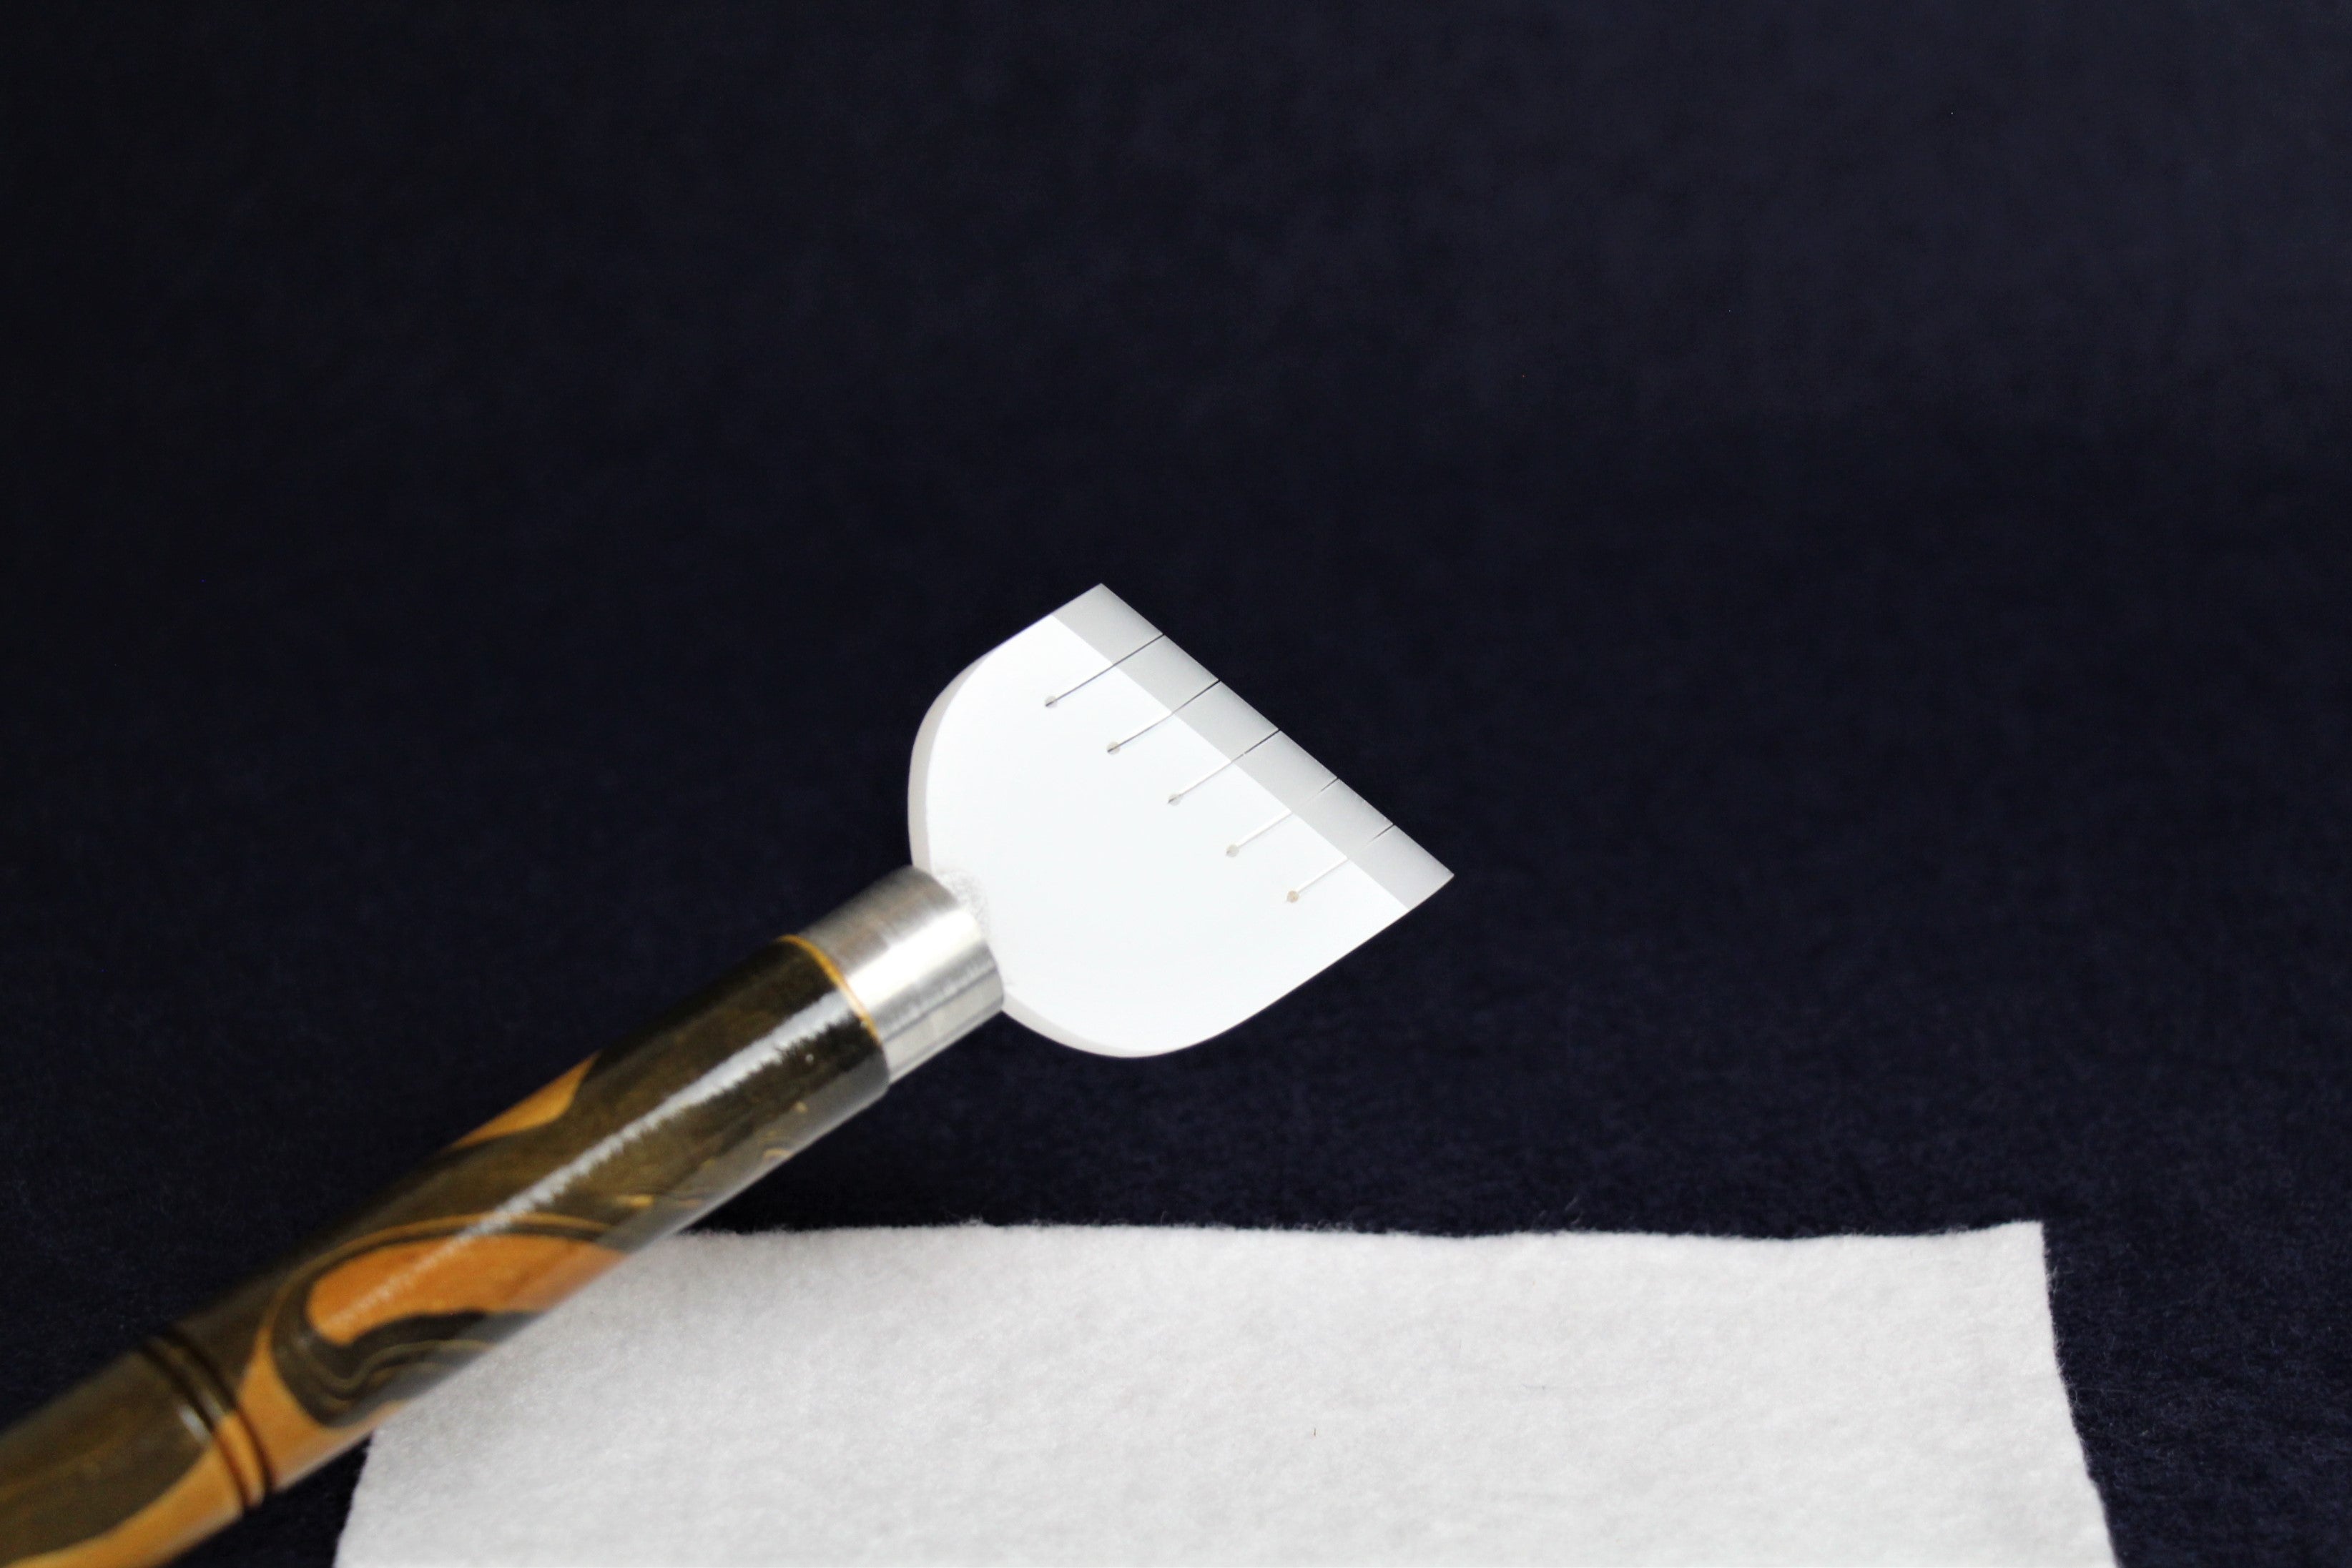 Single extra wide qalam pen with acrylic nib for Arabic calligraphy: from 41 to 45 mm